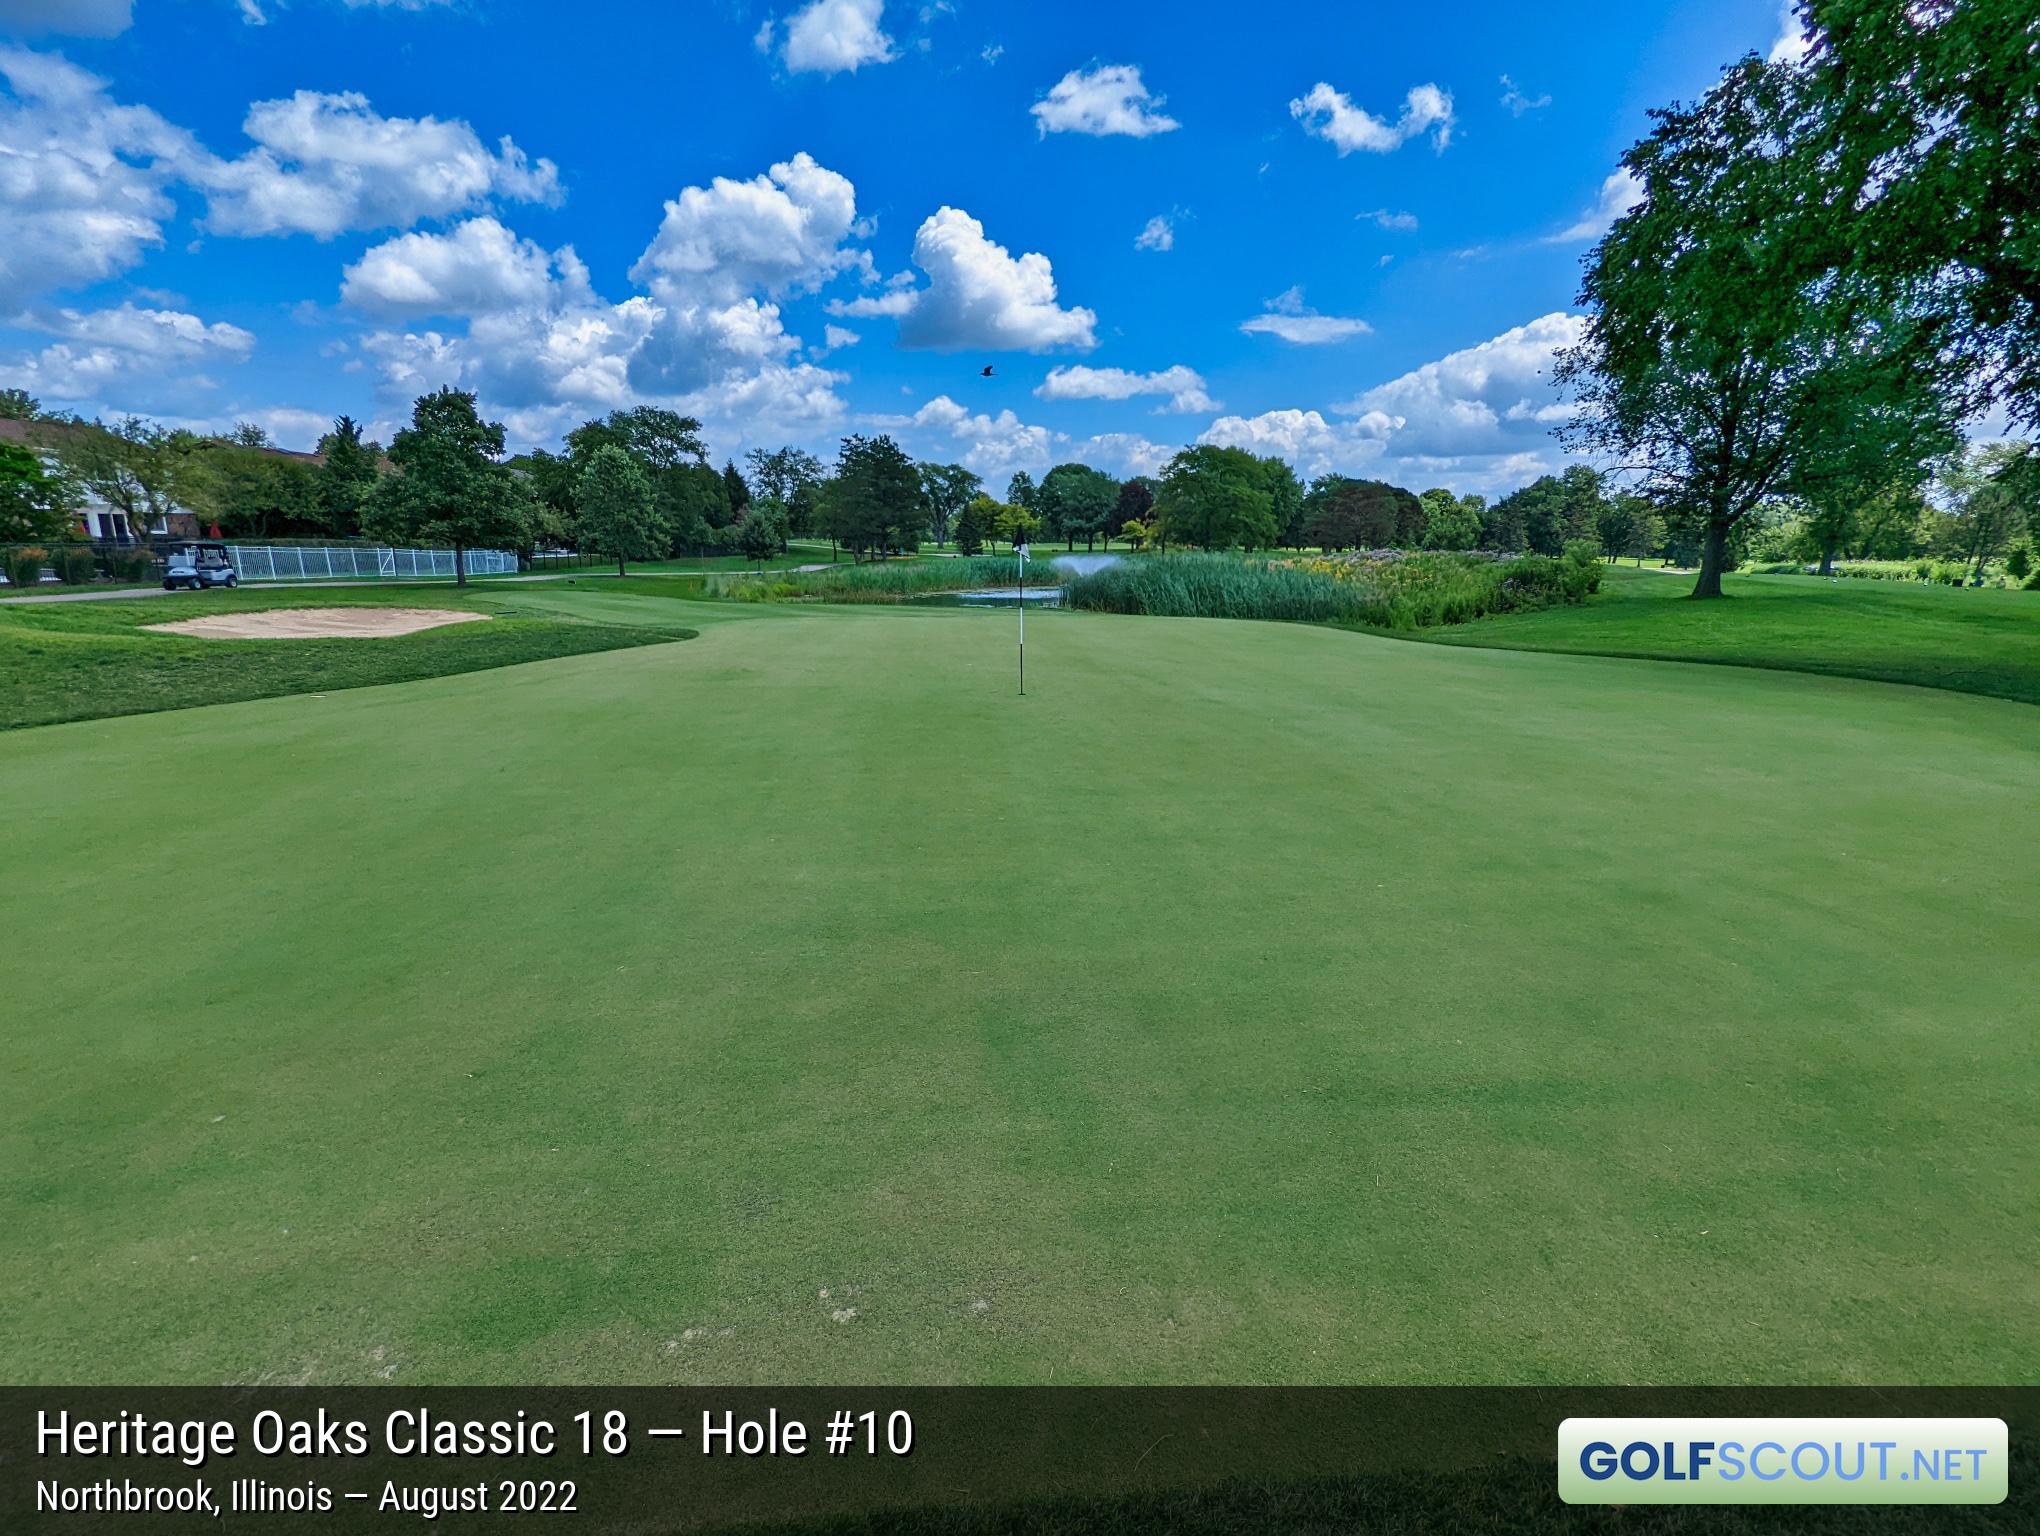 Photo of hole #10 at Heritage Oaks Golf Club - Classic 18 in Northbrook, Illinois. 